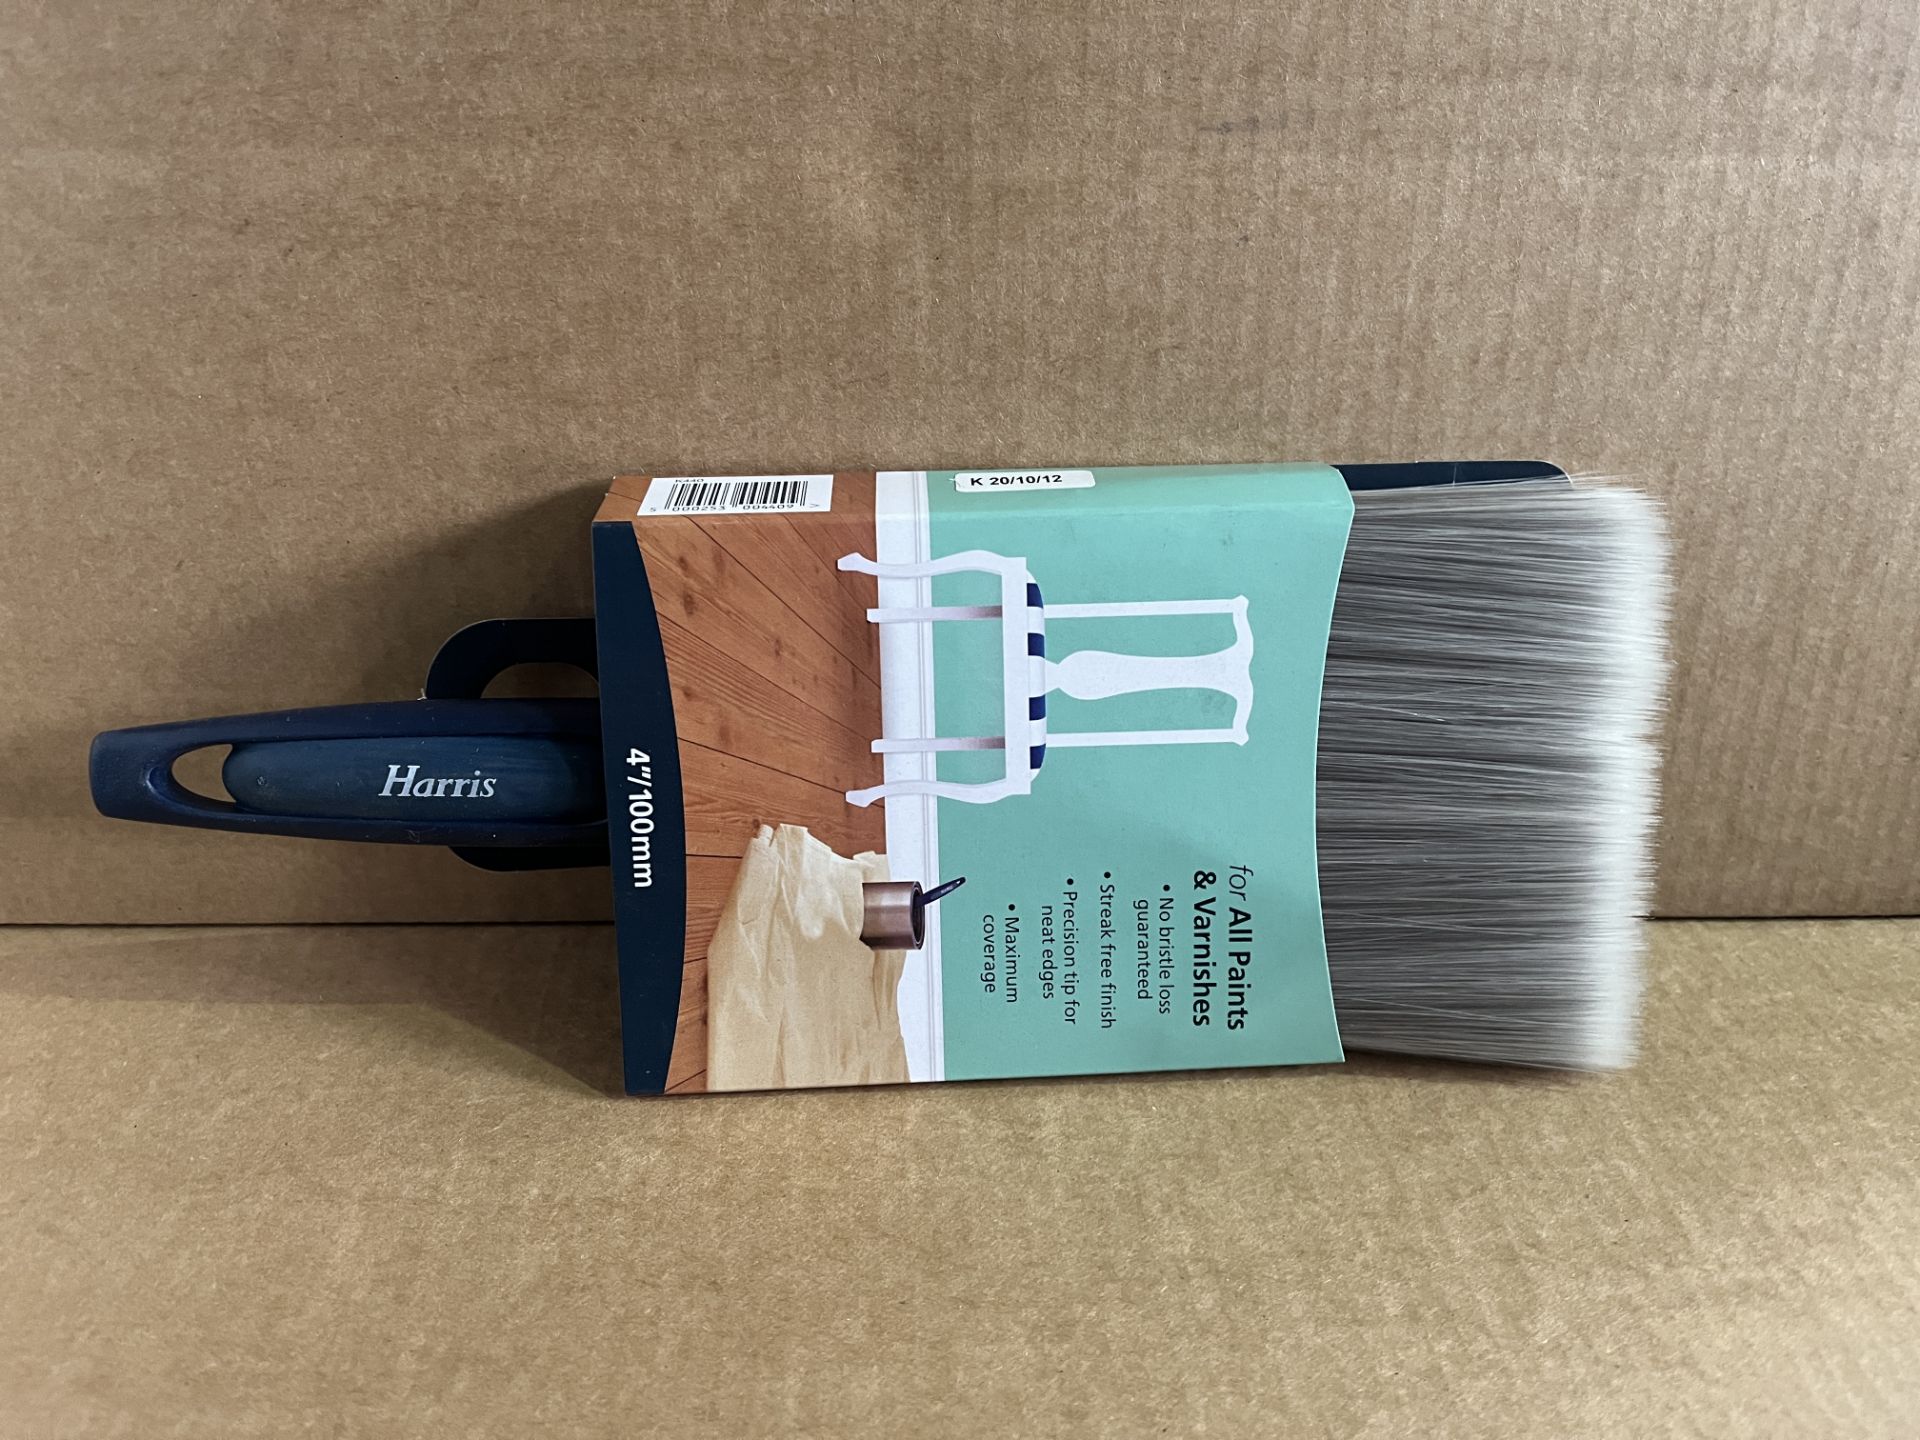 20 X BRAND NEW HARRIS PRECISION TIP PAINT BRUSHES 4 INCH R15